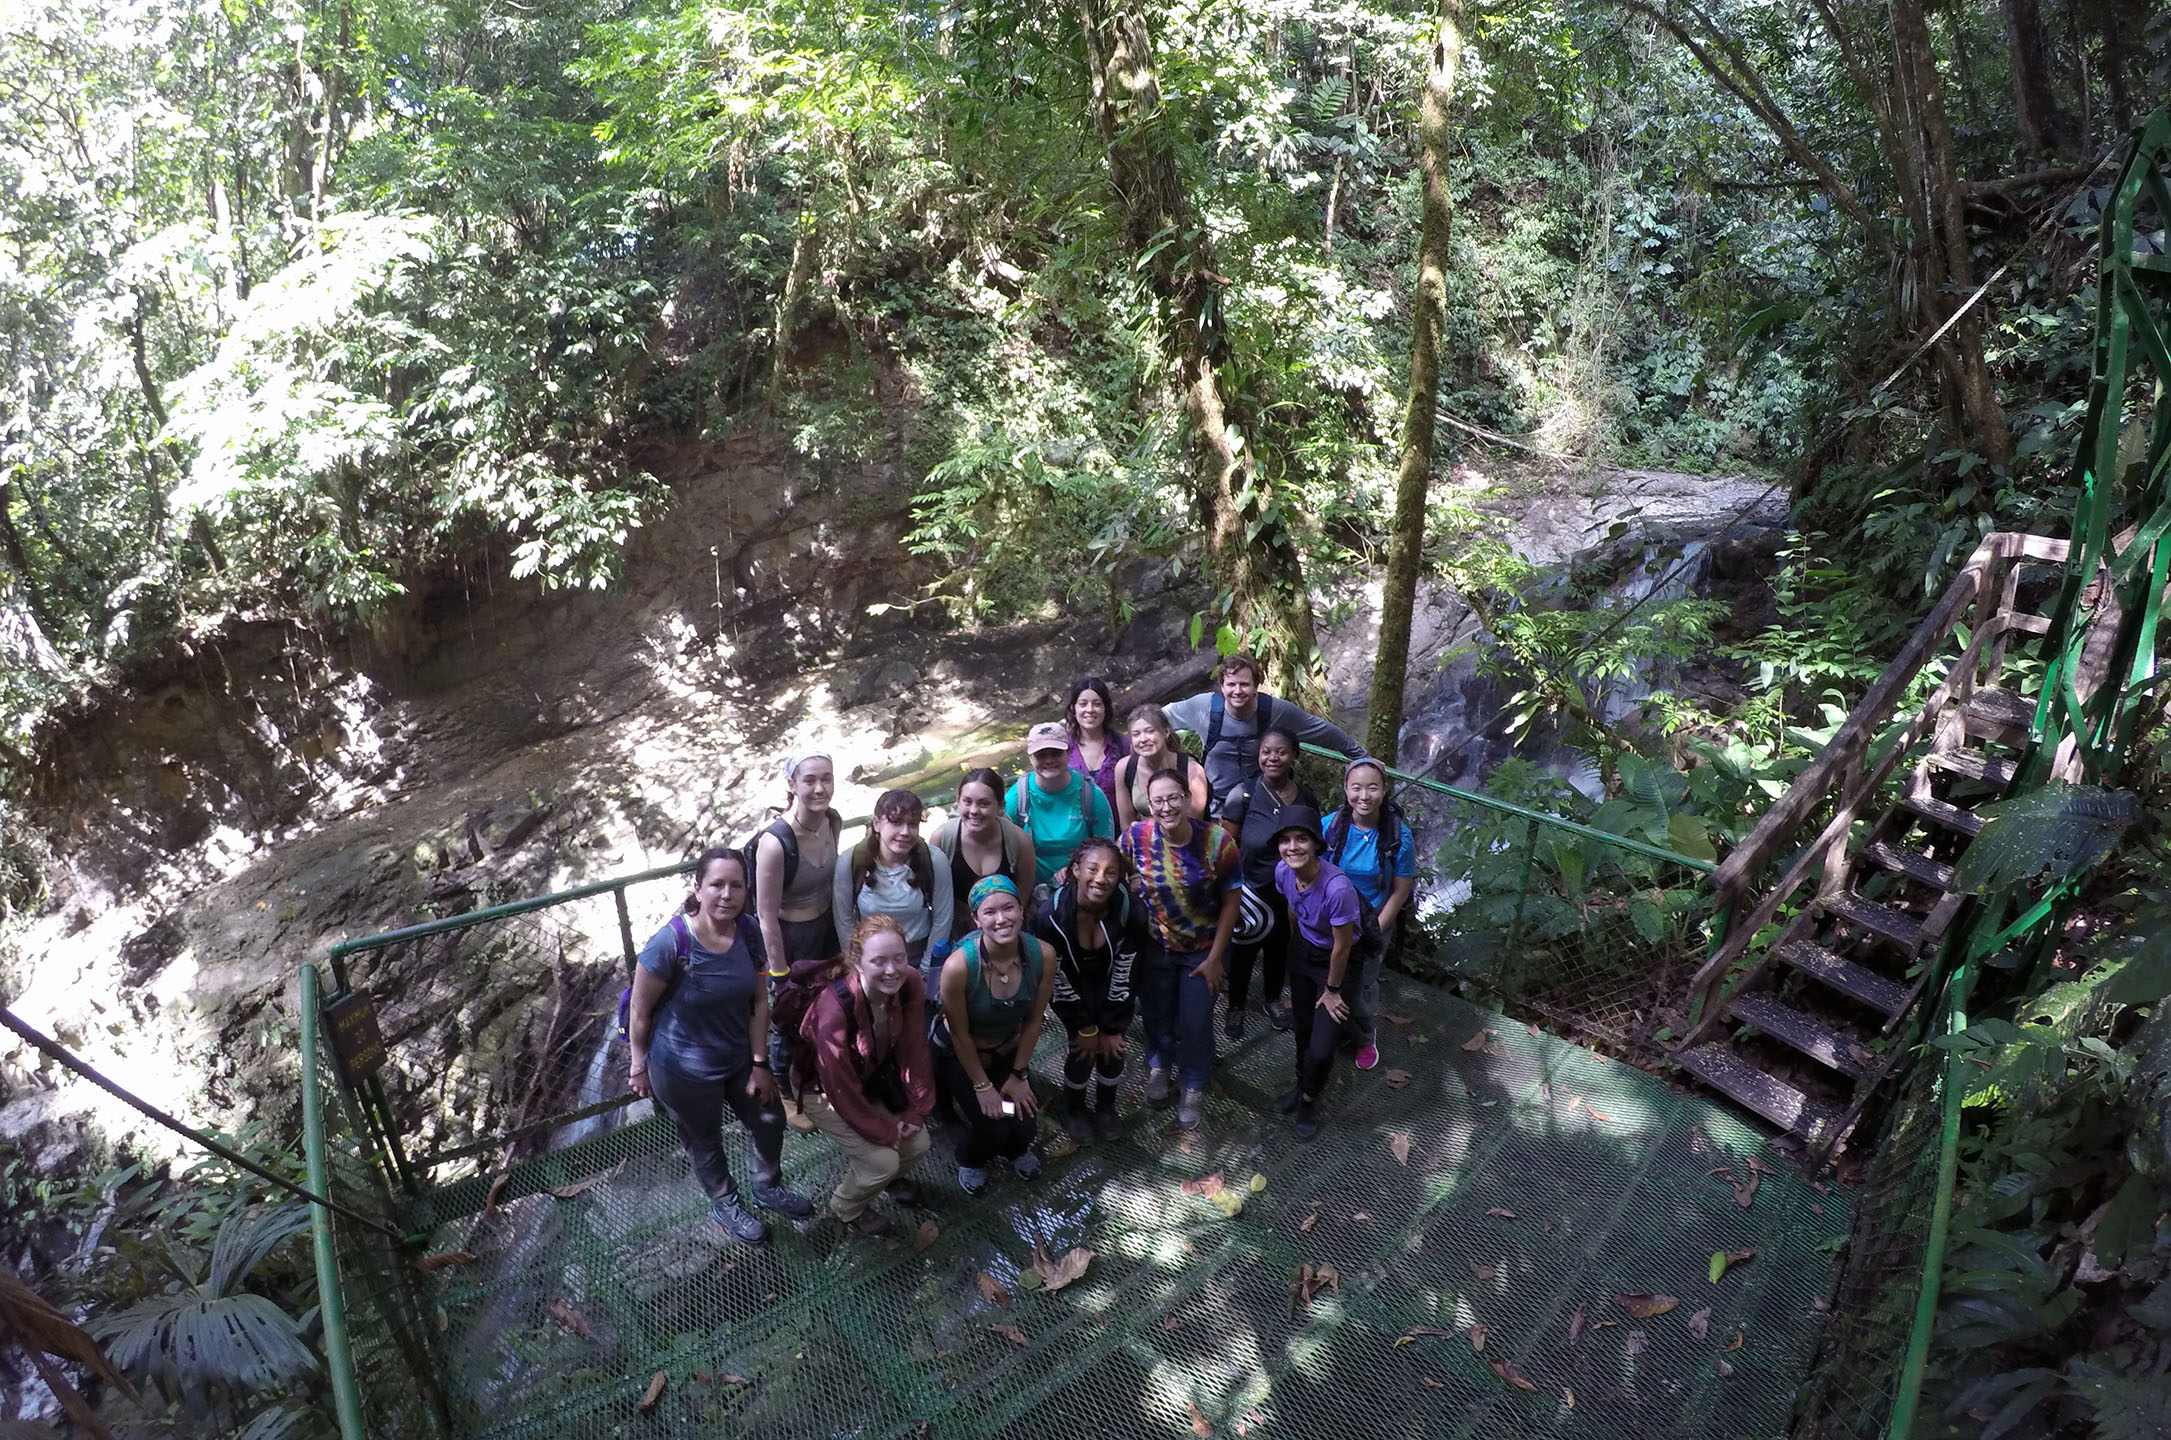 A group of people stand on a wooden platform in the middle of a rainforest.